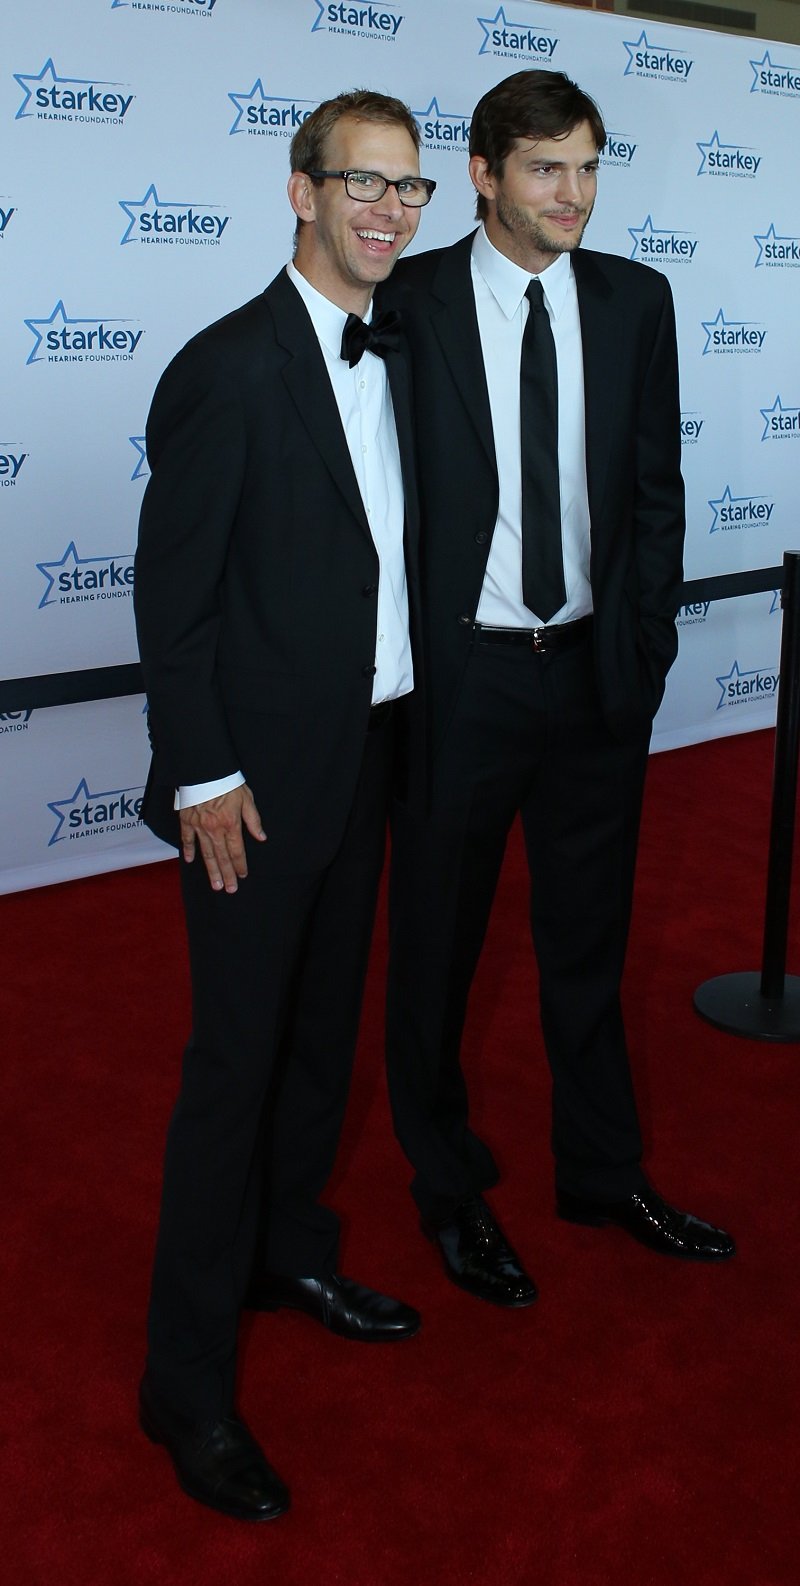 Michael Kutcher and twin brother Ashton Kutcher on July 28, 2013 in St. Paul, Minnesota | Photo: Getty Images